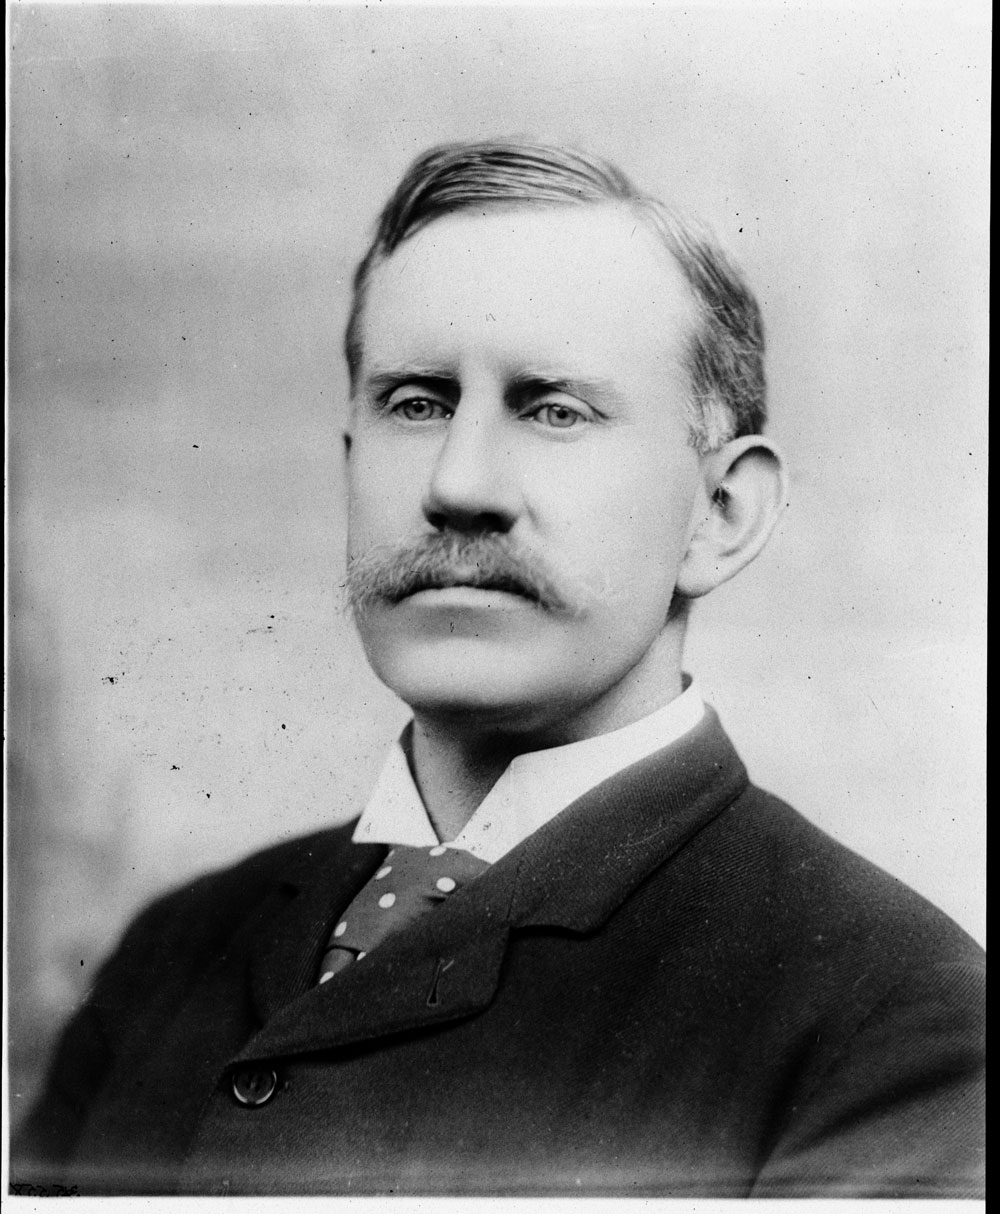 A formal portrait of Walter Liberty Vernon taken by the Government Printing Office. He wears a dark suit and polka-dot tie. 